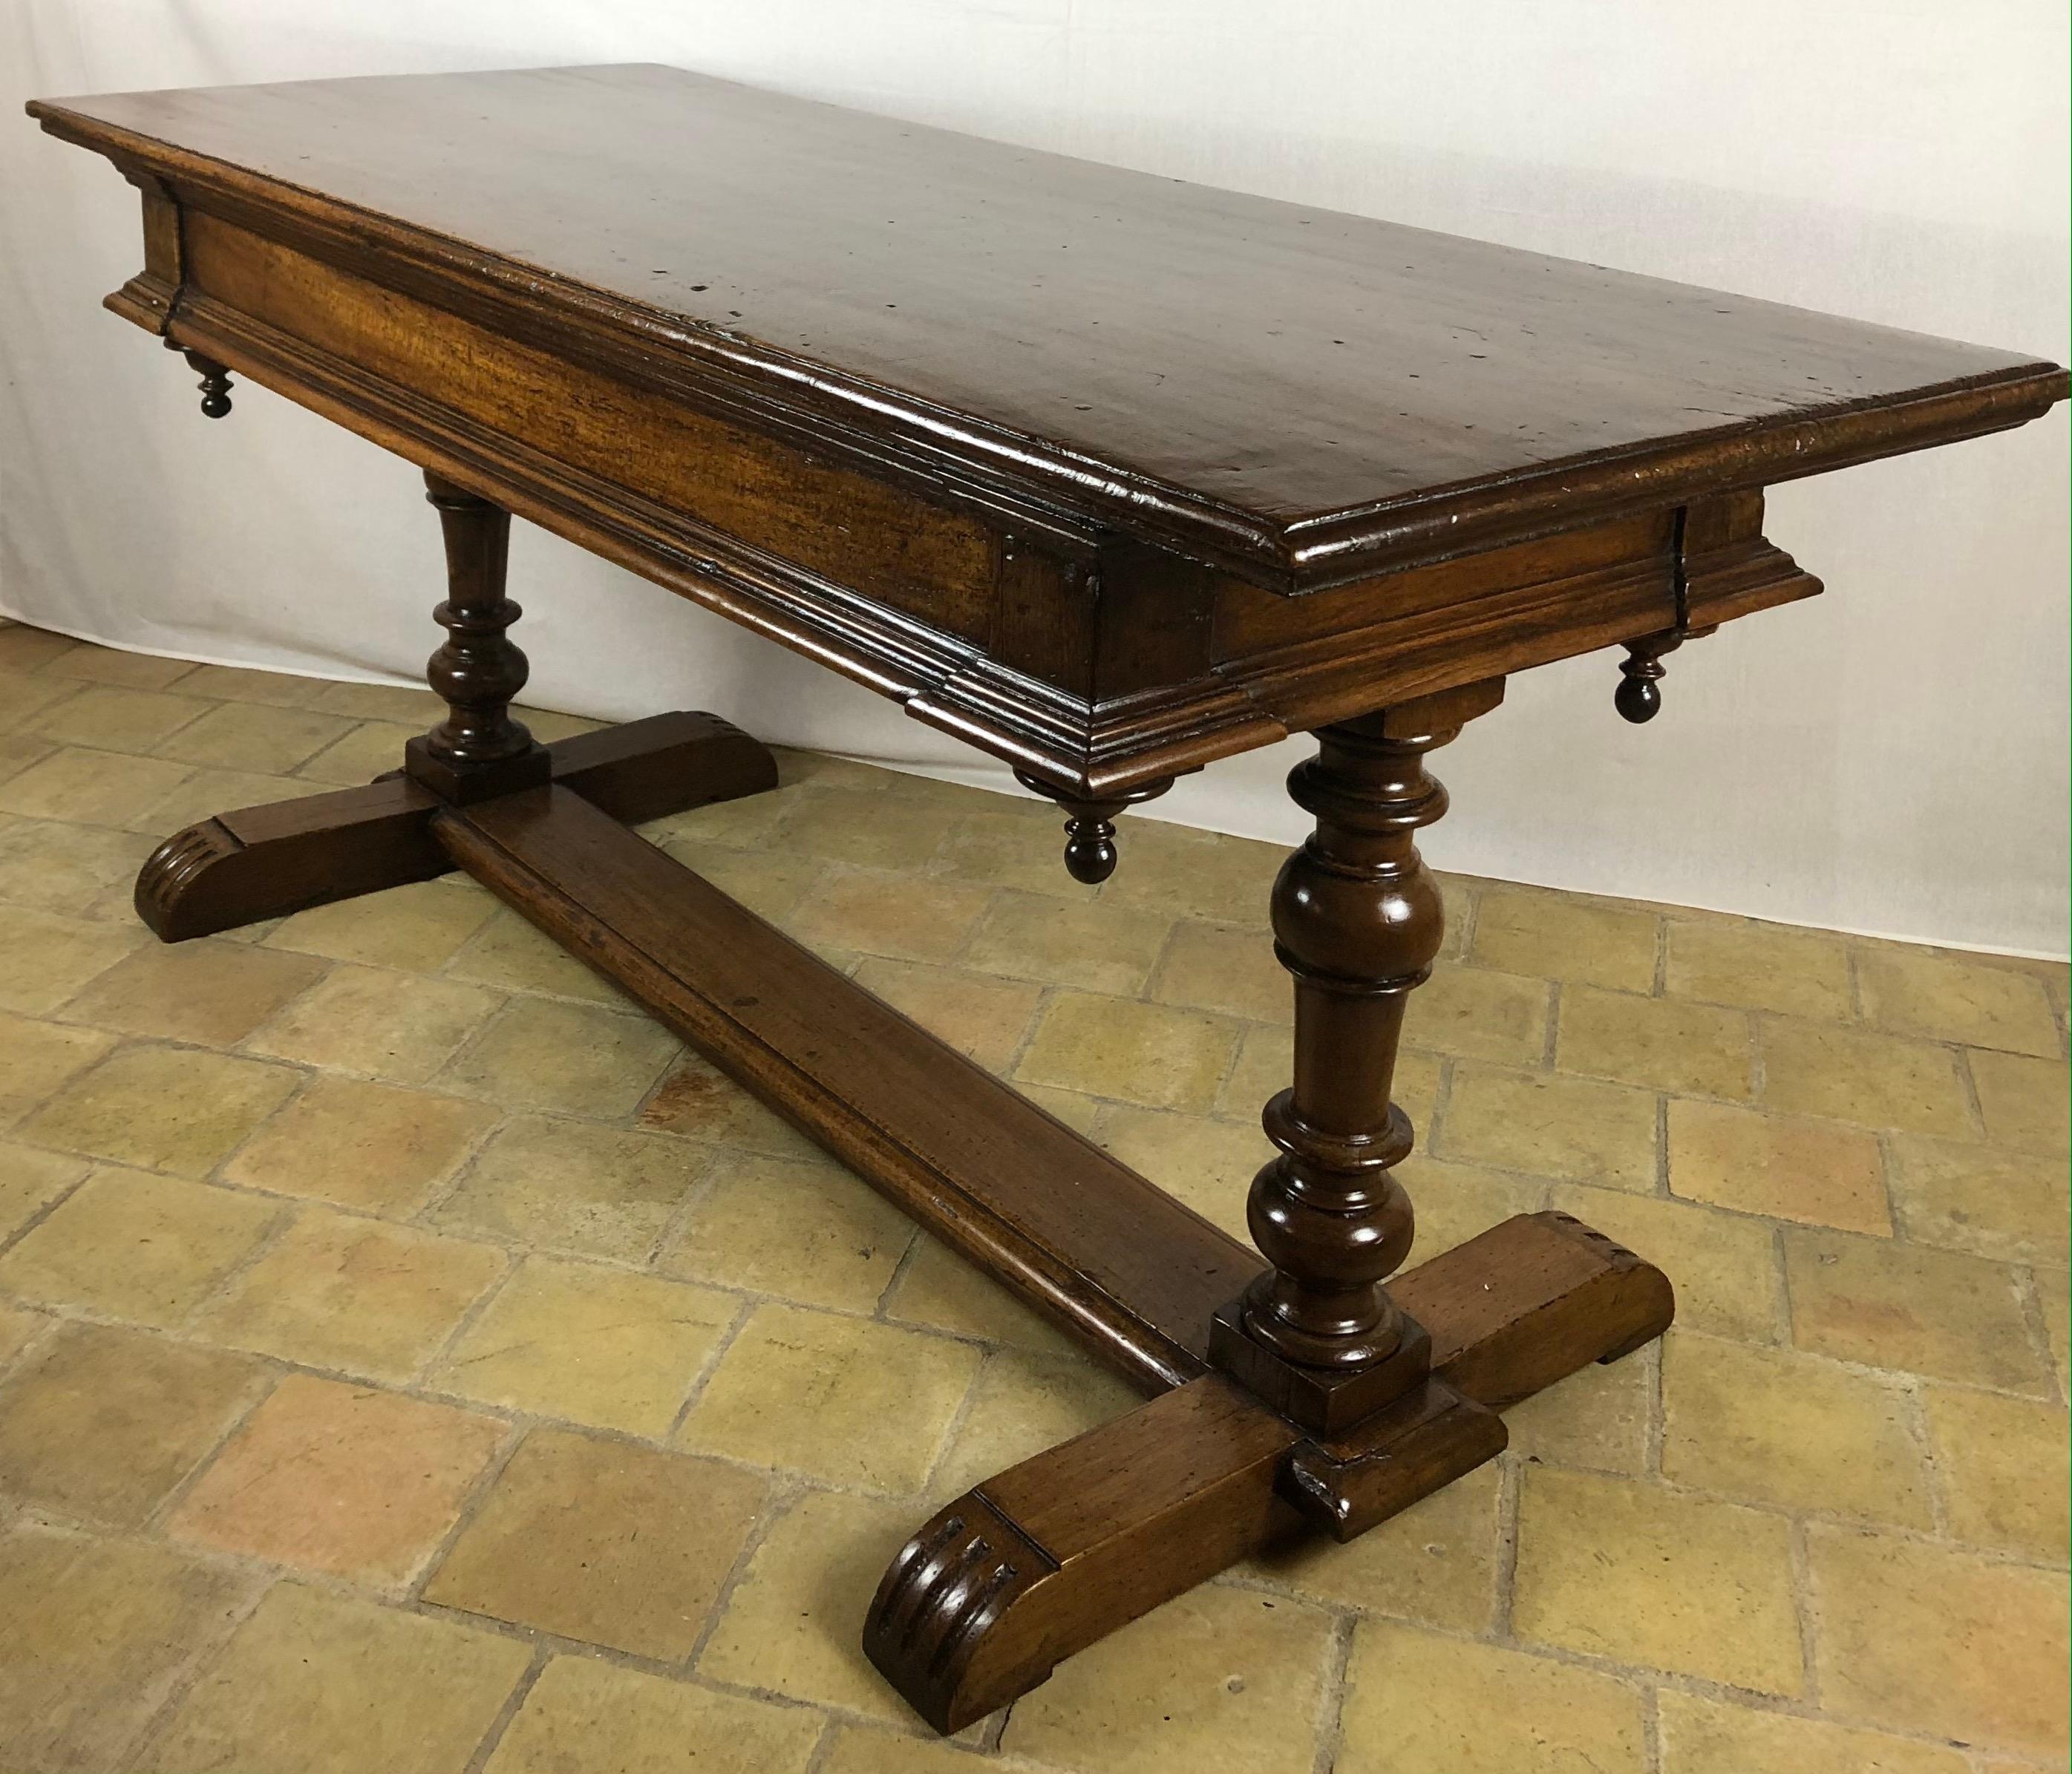 A very good quality 18th century French Louis XIII style rectangular sofa console or display table. This table is made of strong walnut wood and is a multi functional table. It is raised by two beautiful turned legs and their original and large